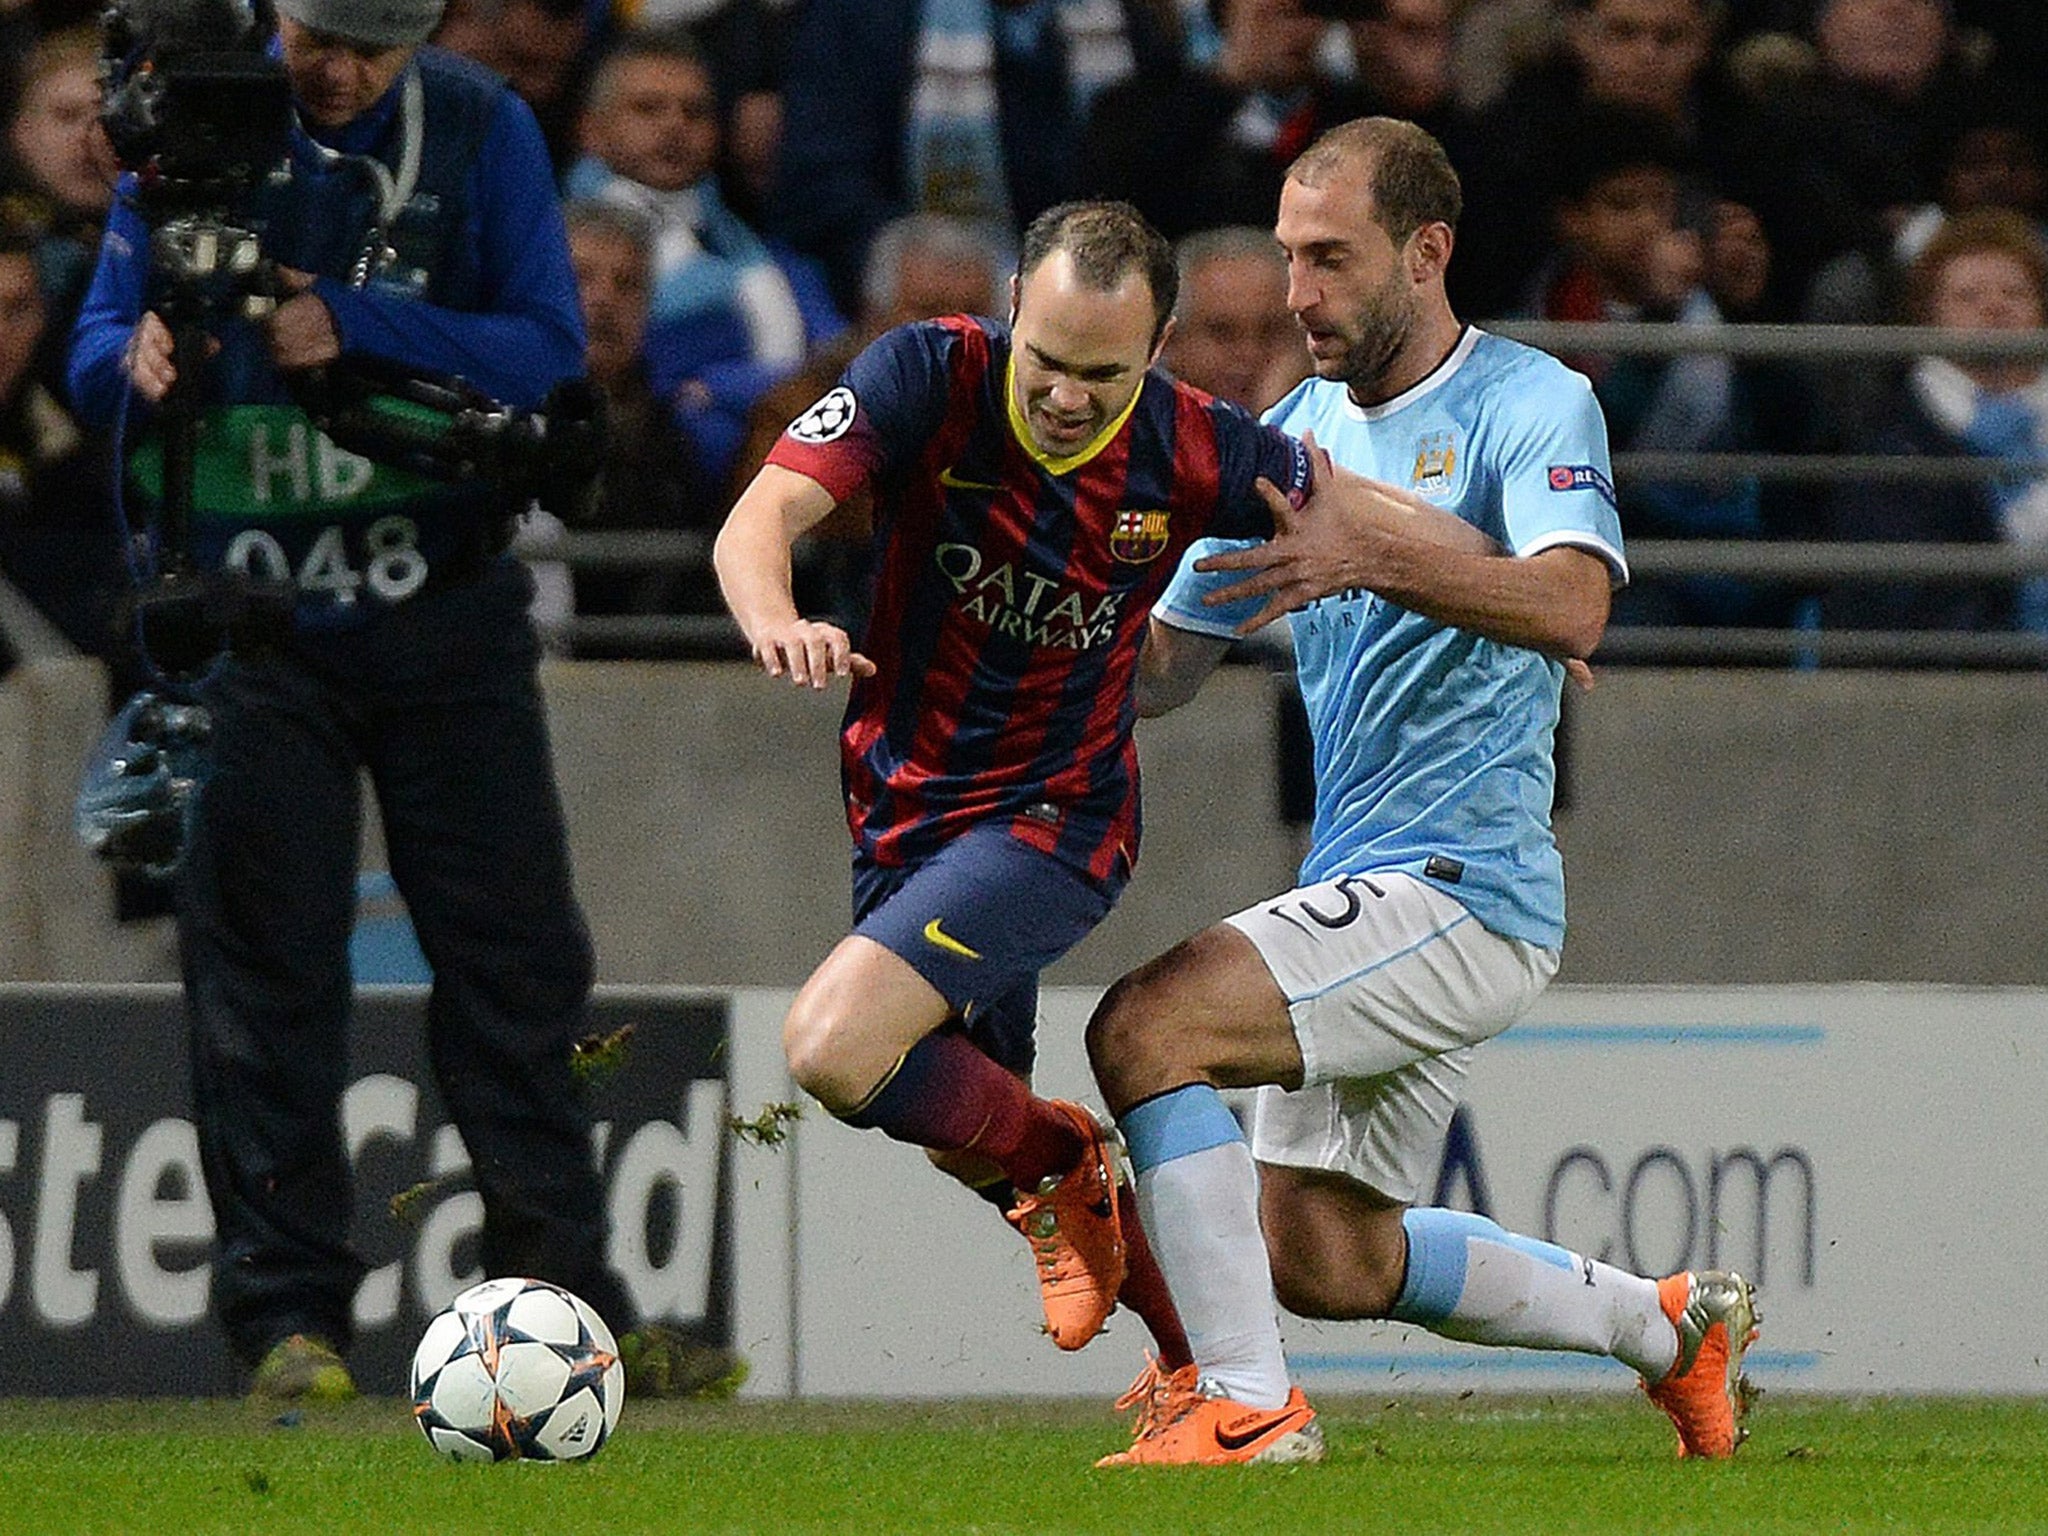 Andres Iniesta (left) is tackled by Manchester City's Pablo Zabaleta